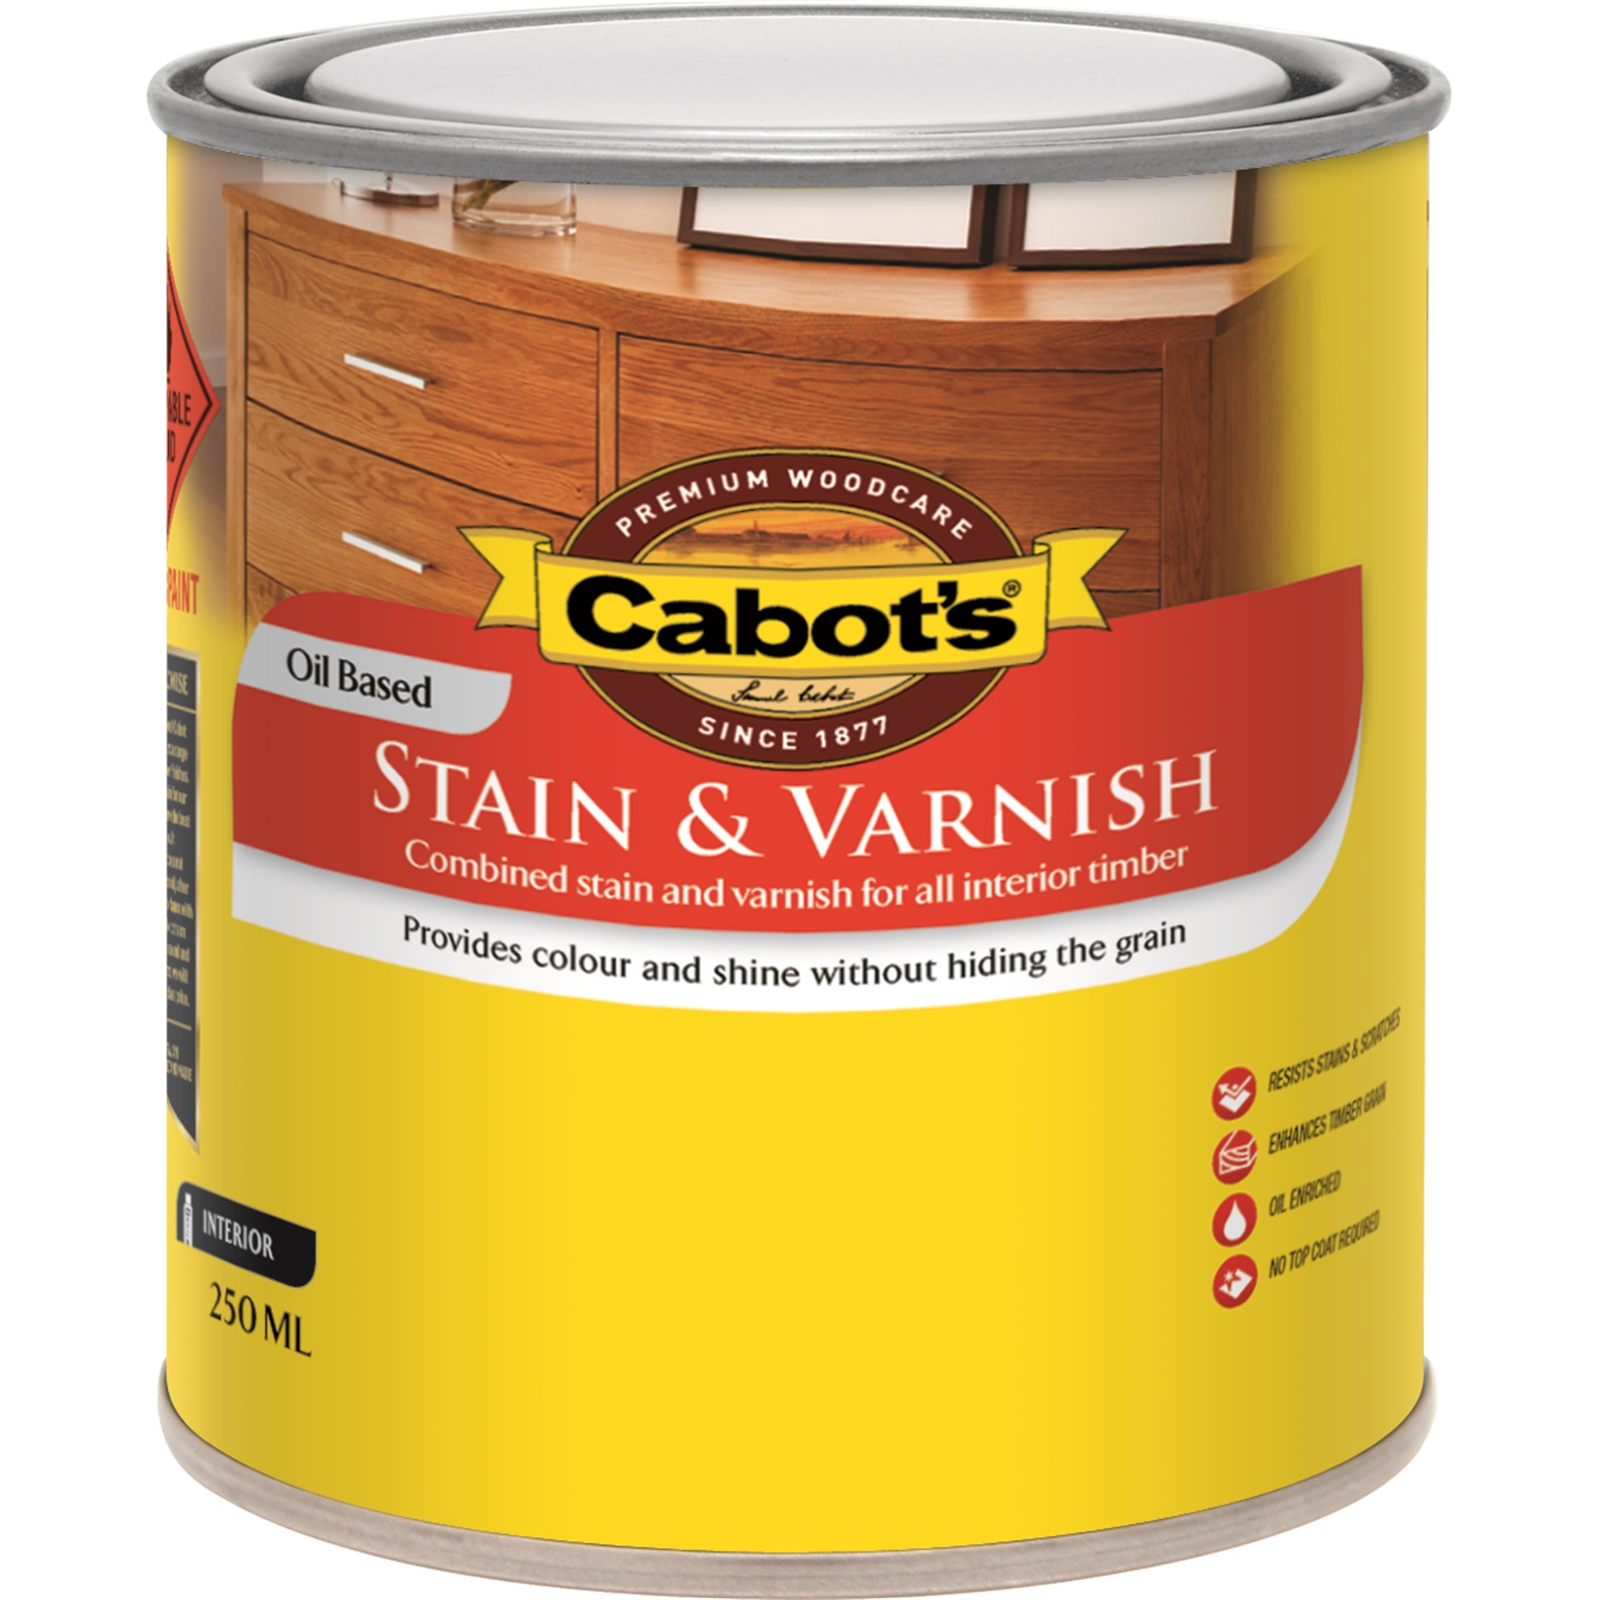 Cabot's 250ml Gloss Walnut Stain and Varnish